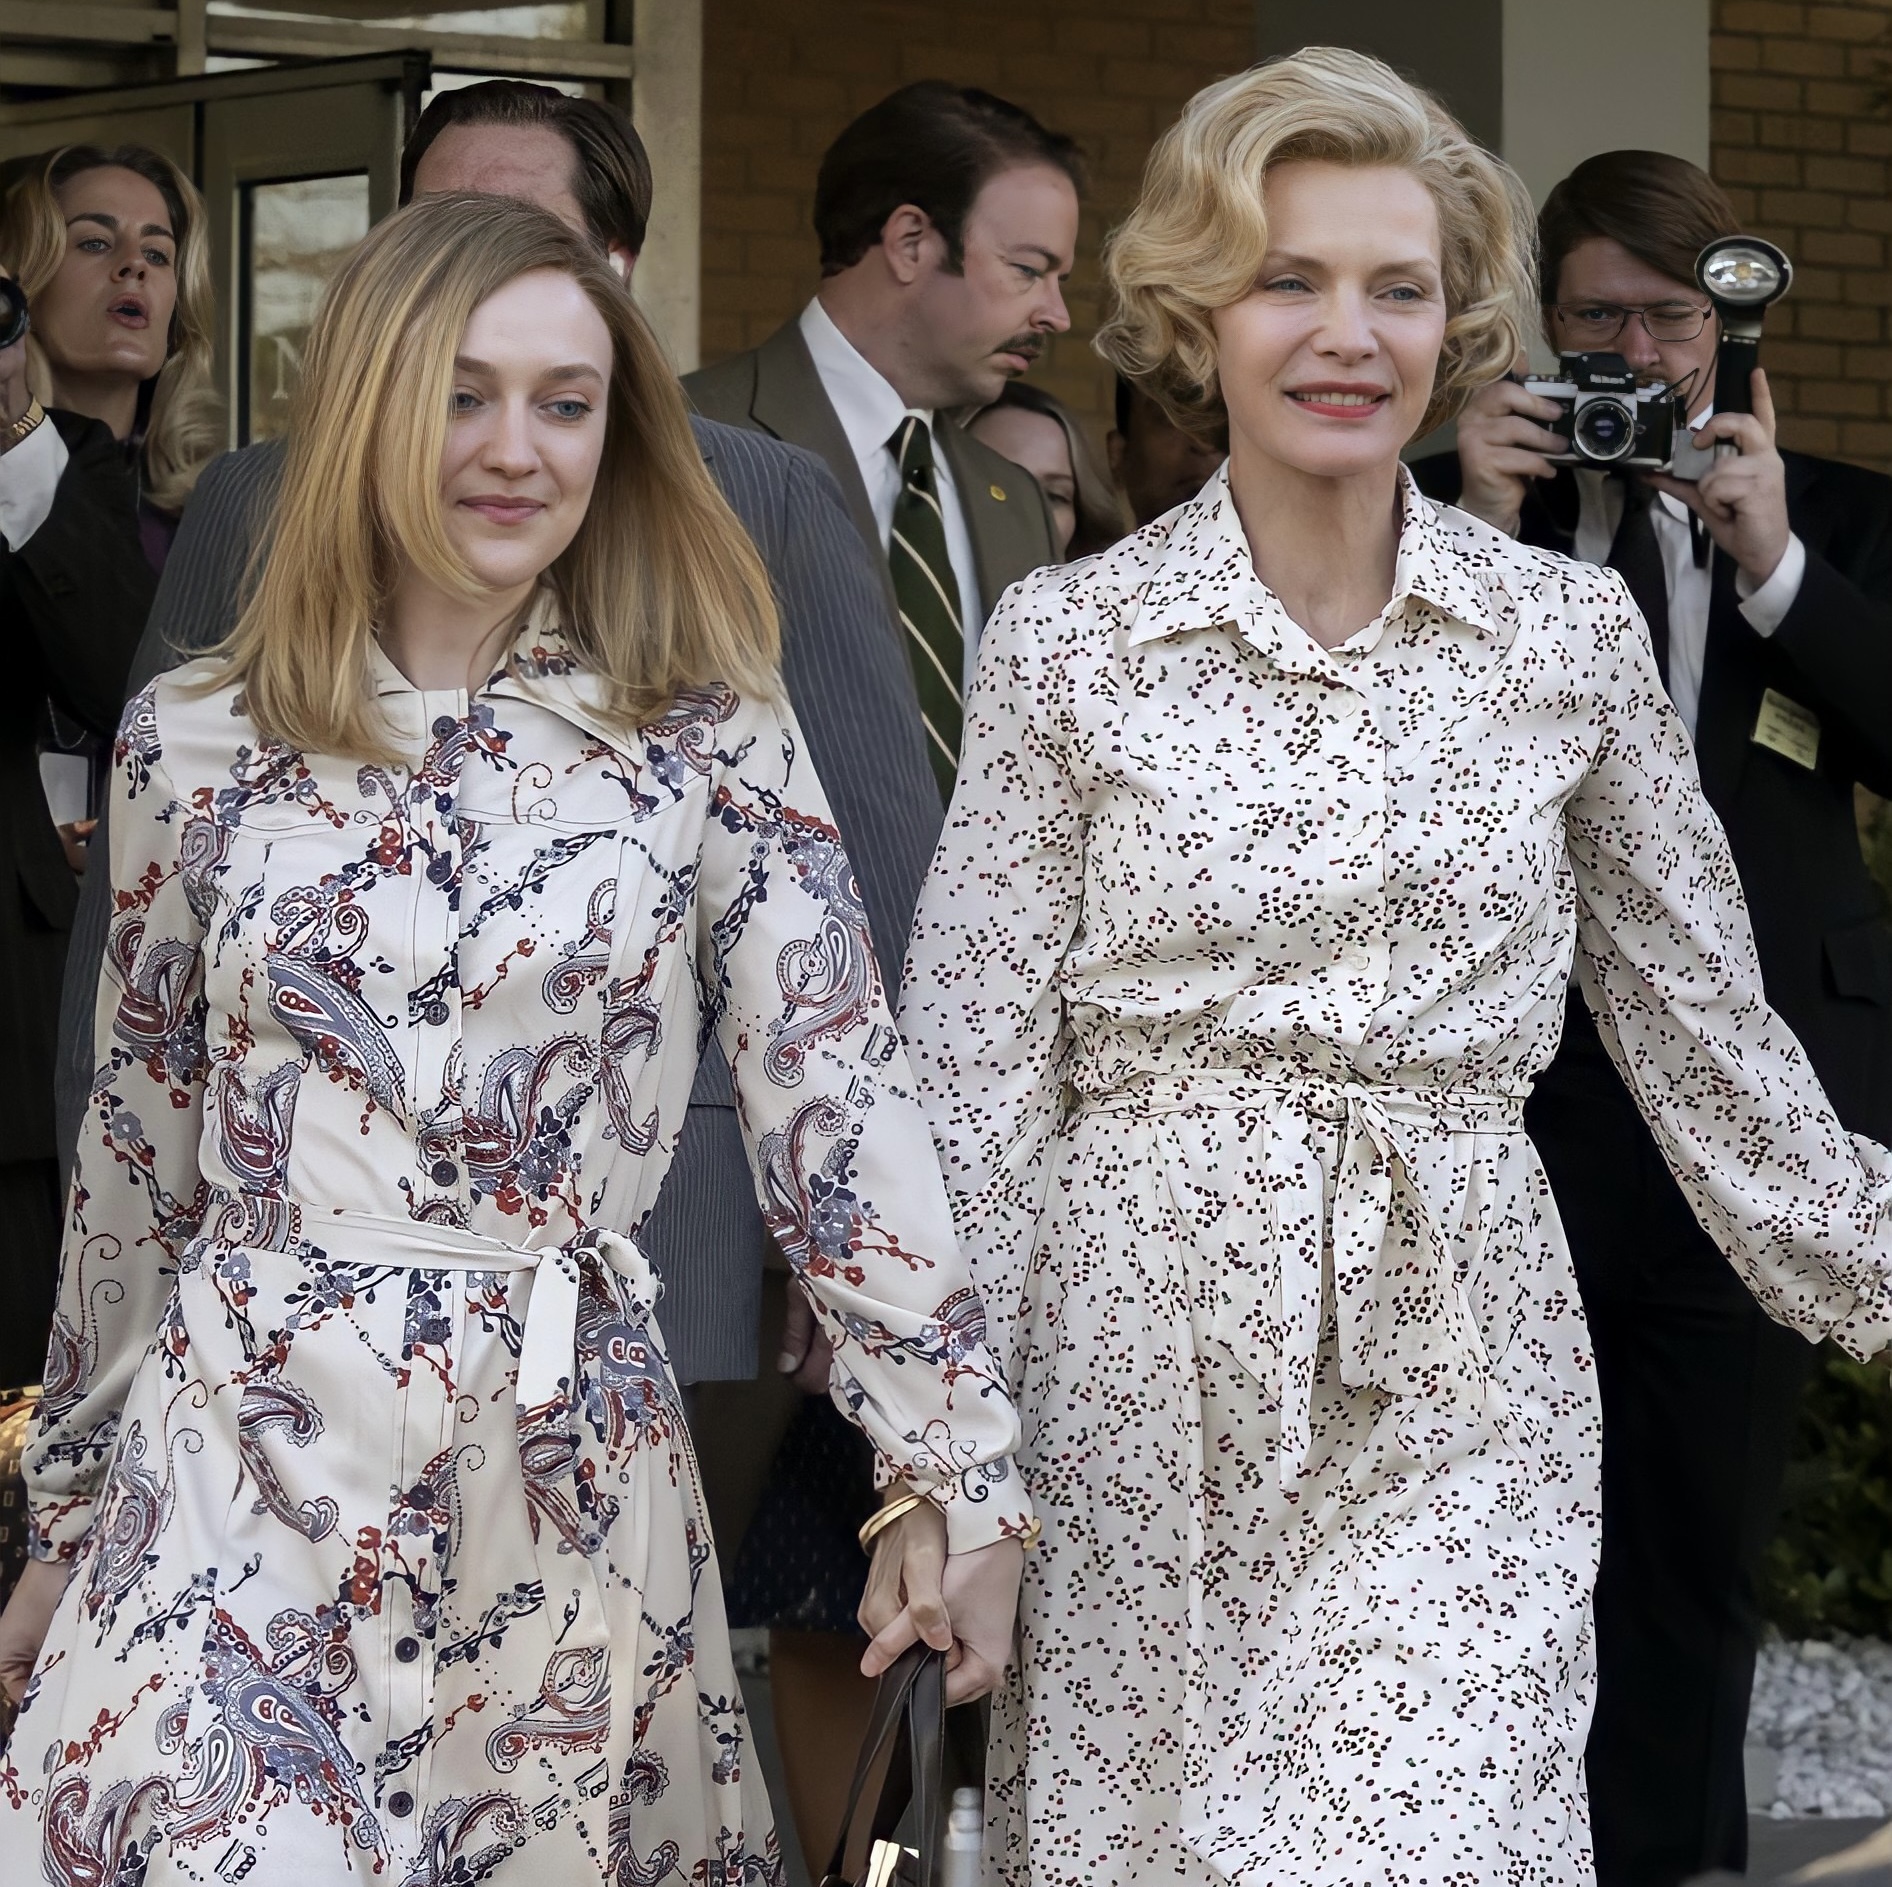 Dakota Fanning Michelle Pfeiffer as Susan Elizabeth and Betty Ford in The First Lady